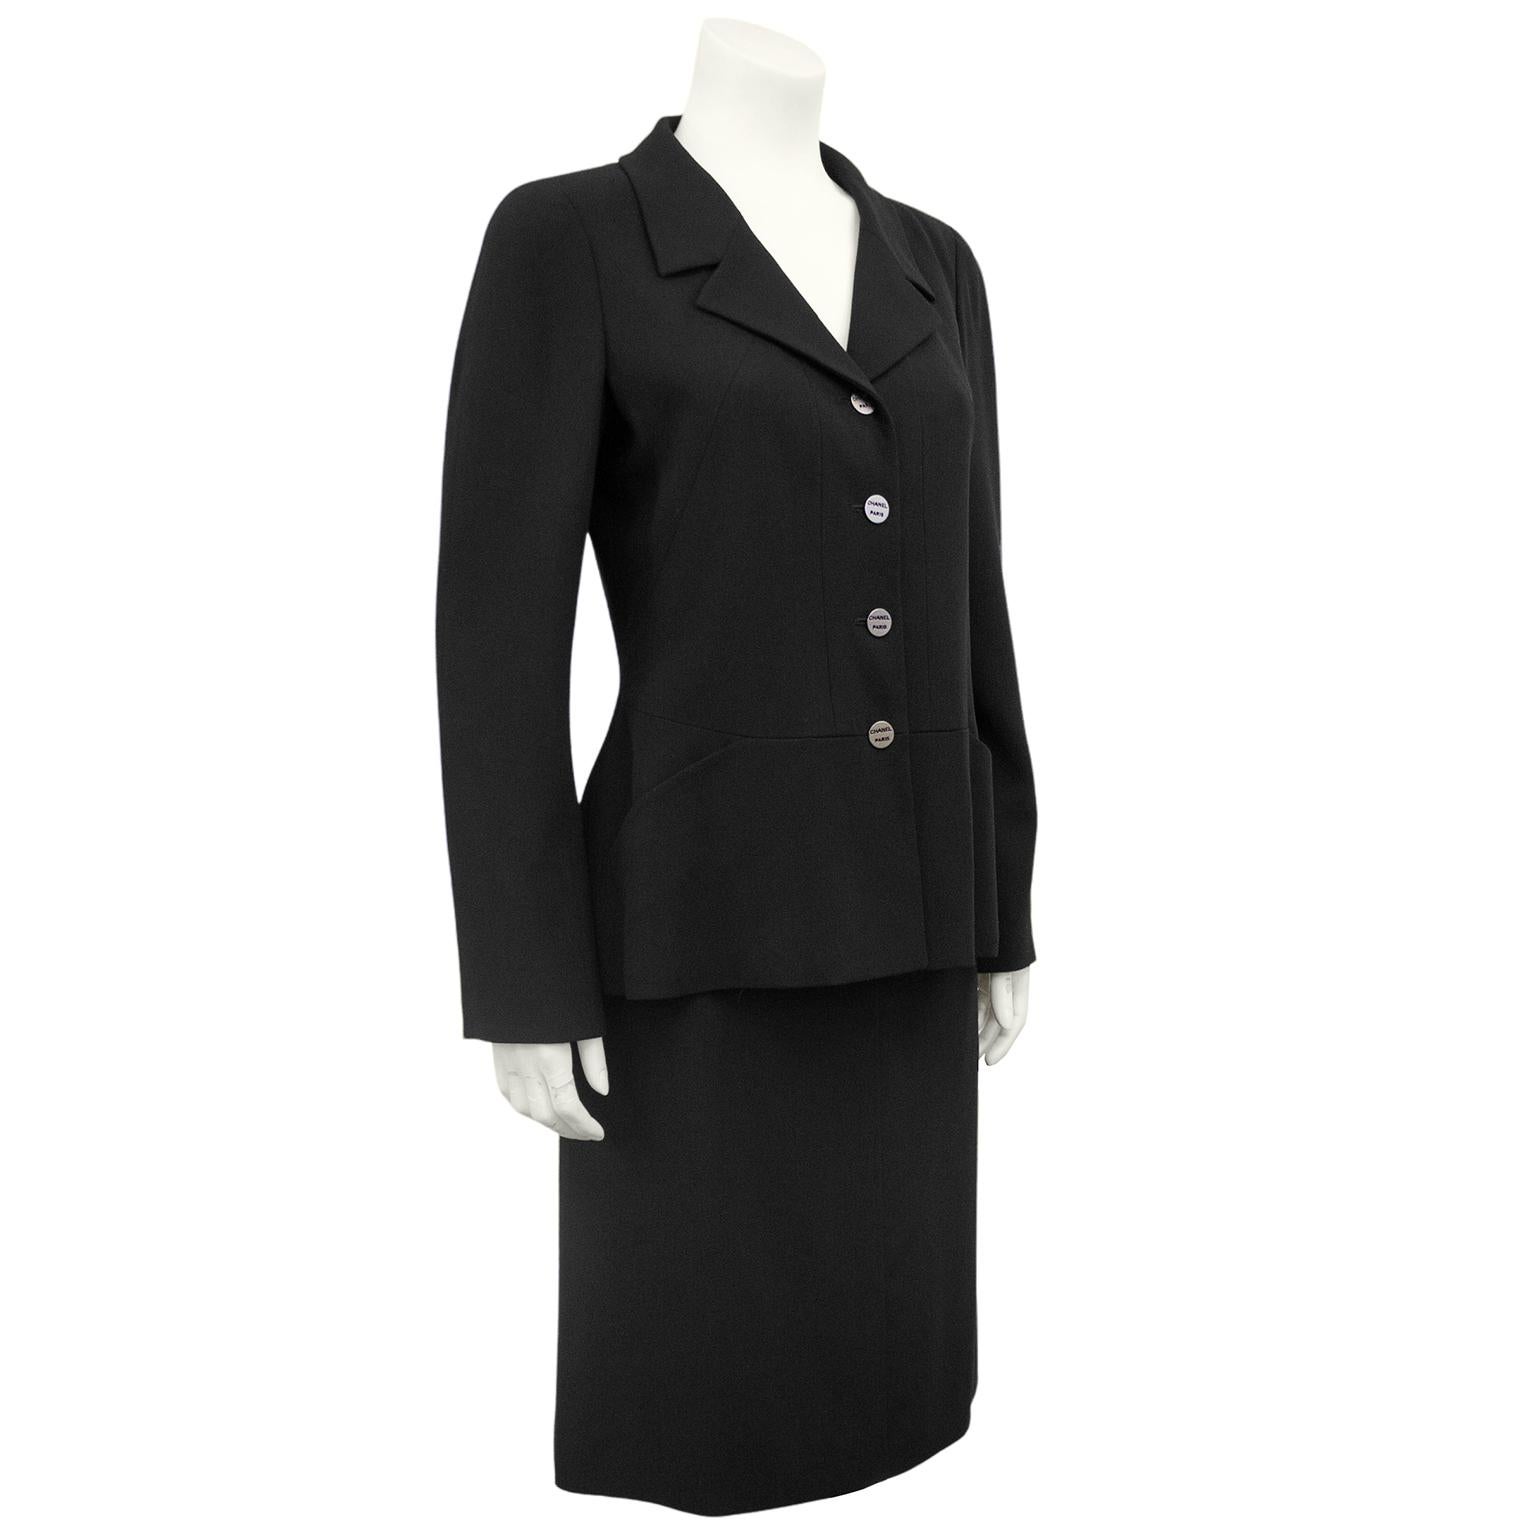 Classic black Chanel skirt suit from the year 2000. Timeless black blazer with silver 'Chanel Paris' buttons. Blazer is beautifully constructed - fitted through the body with a vertical seaming. Horizontal seam at waist creating flattering and